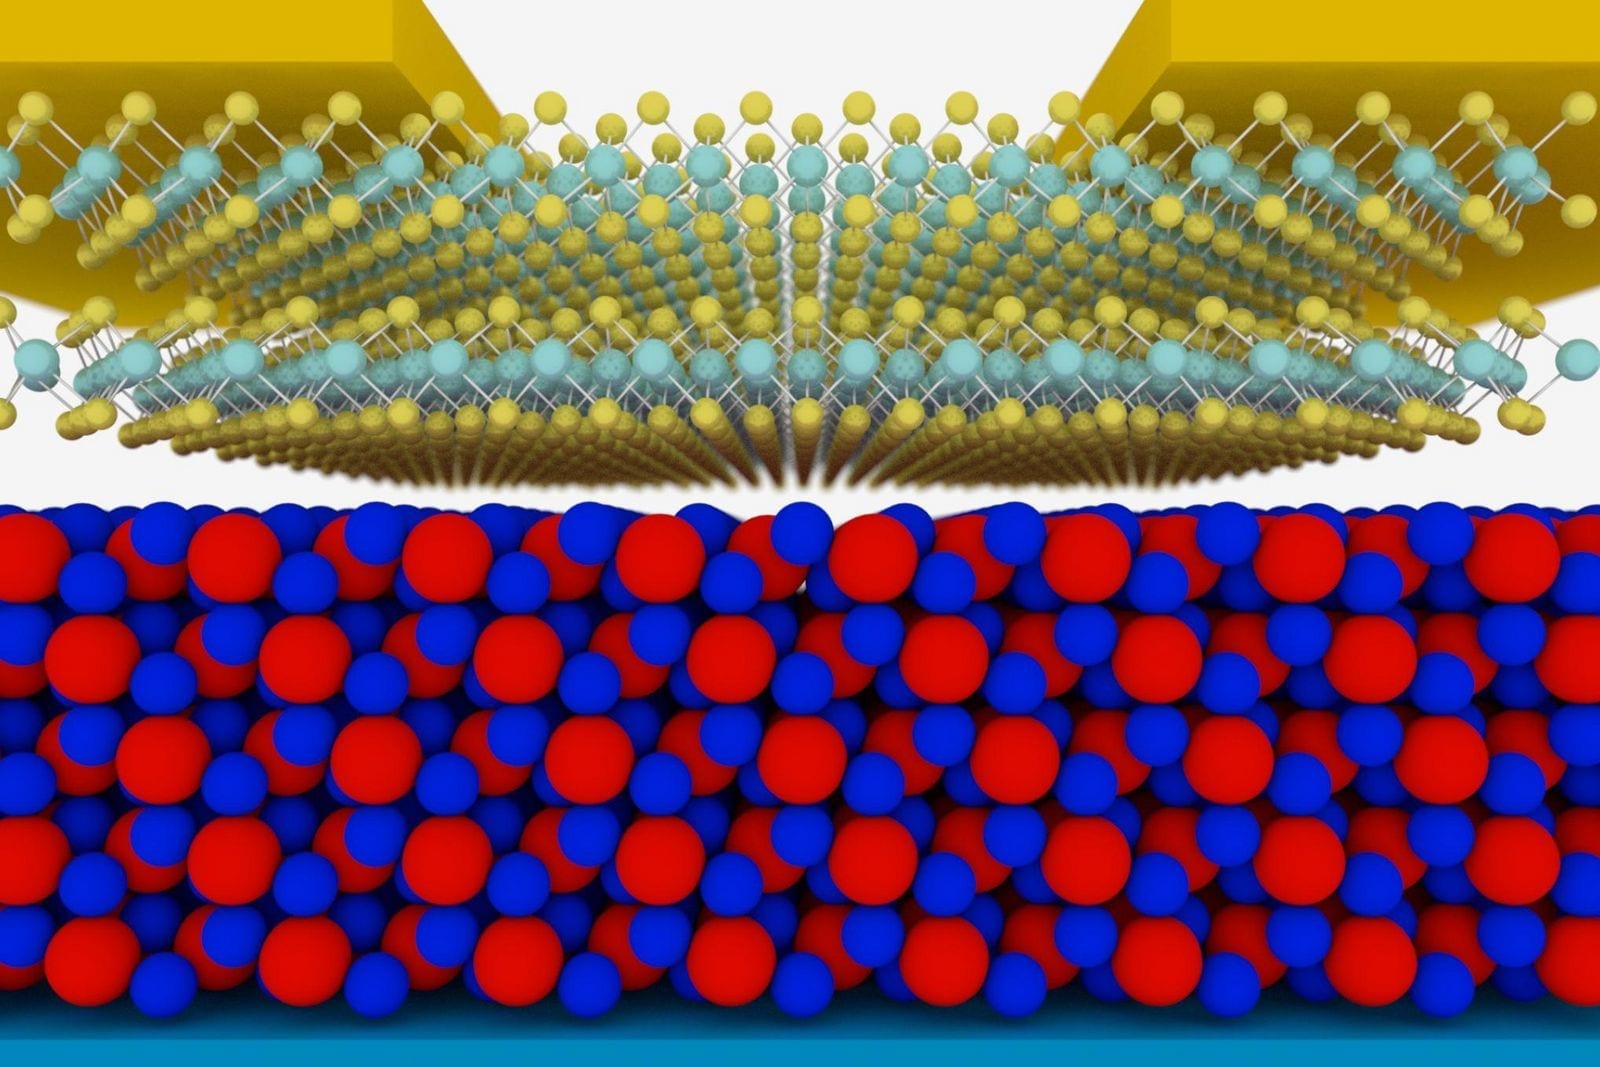 A two-dimensional materials transistor technology that could restart Moore’s law